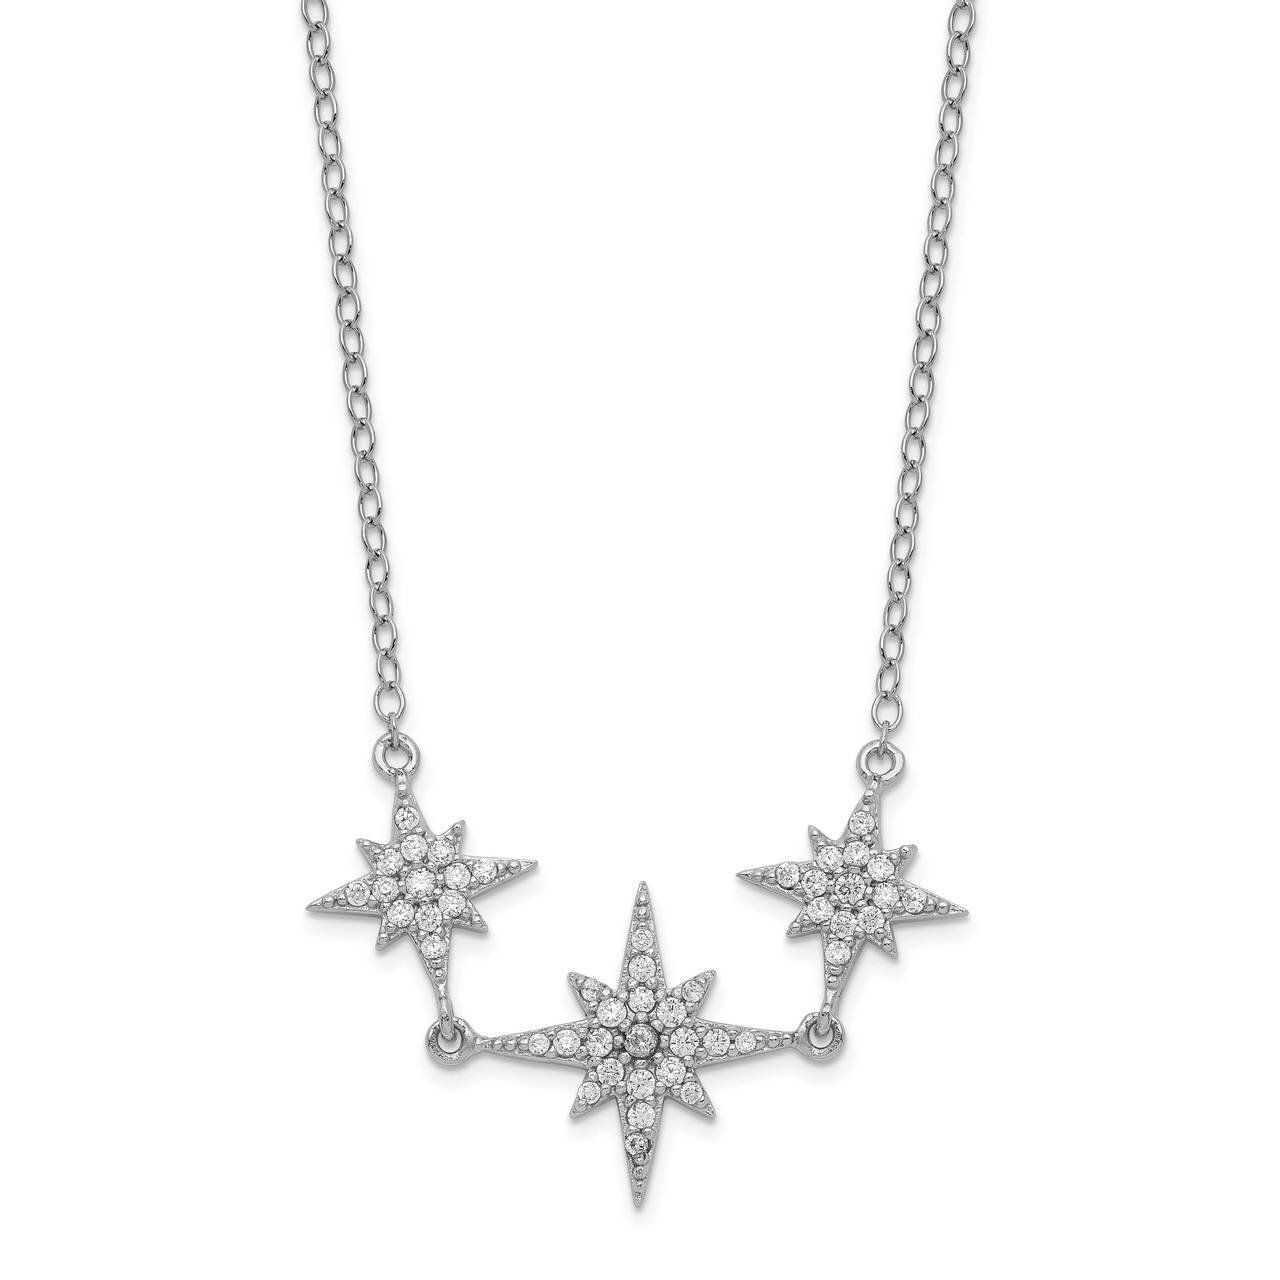 3-Stars with 2 inch Extender Necklace Sterling Silver Rhodium-plated CZ Diamond QG5516-16